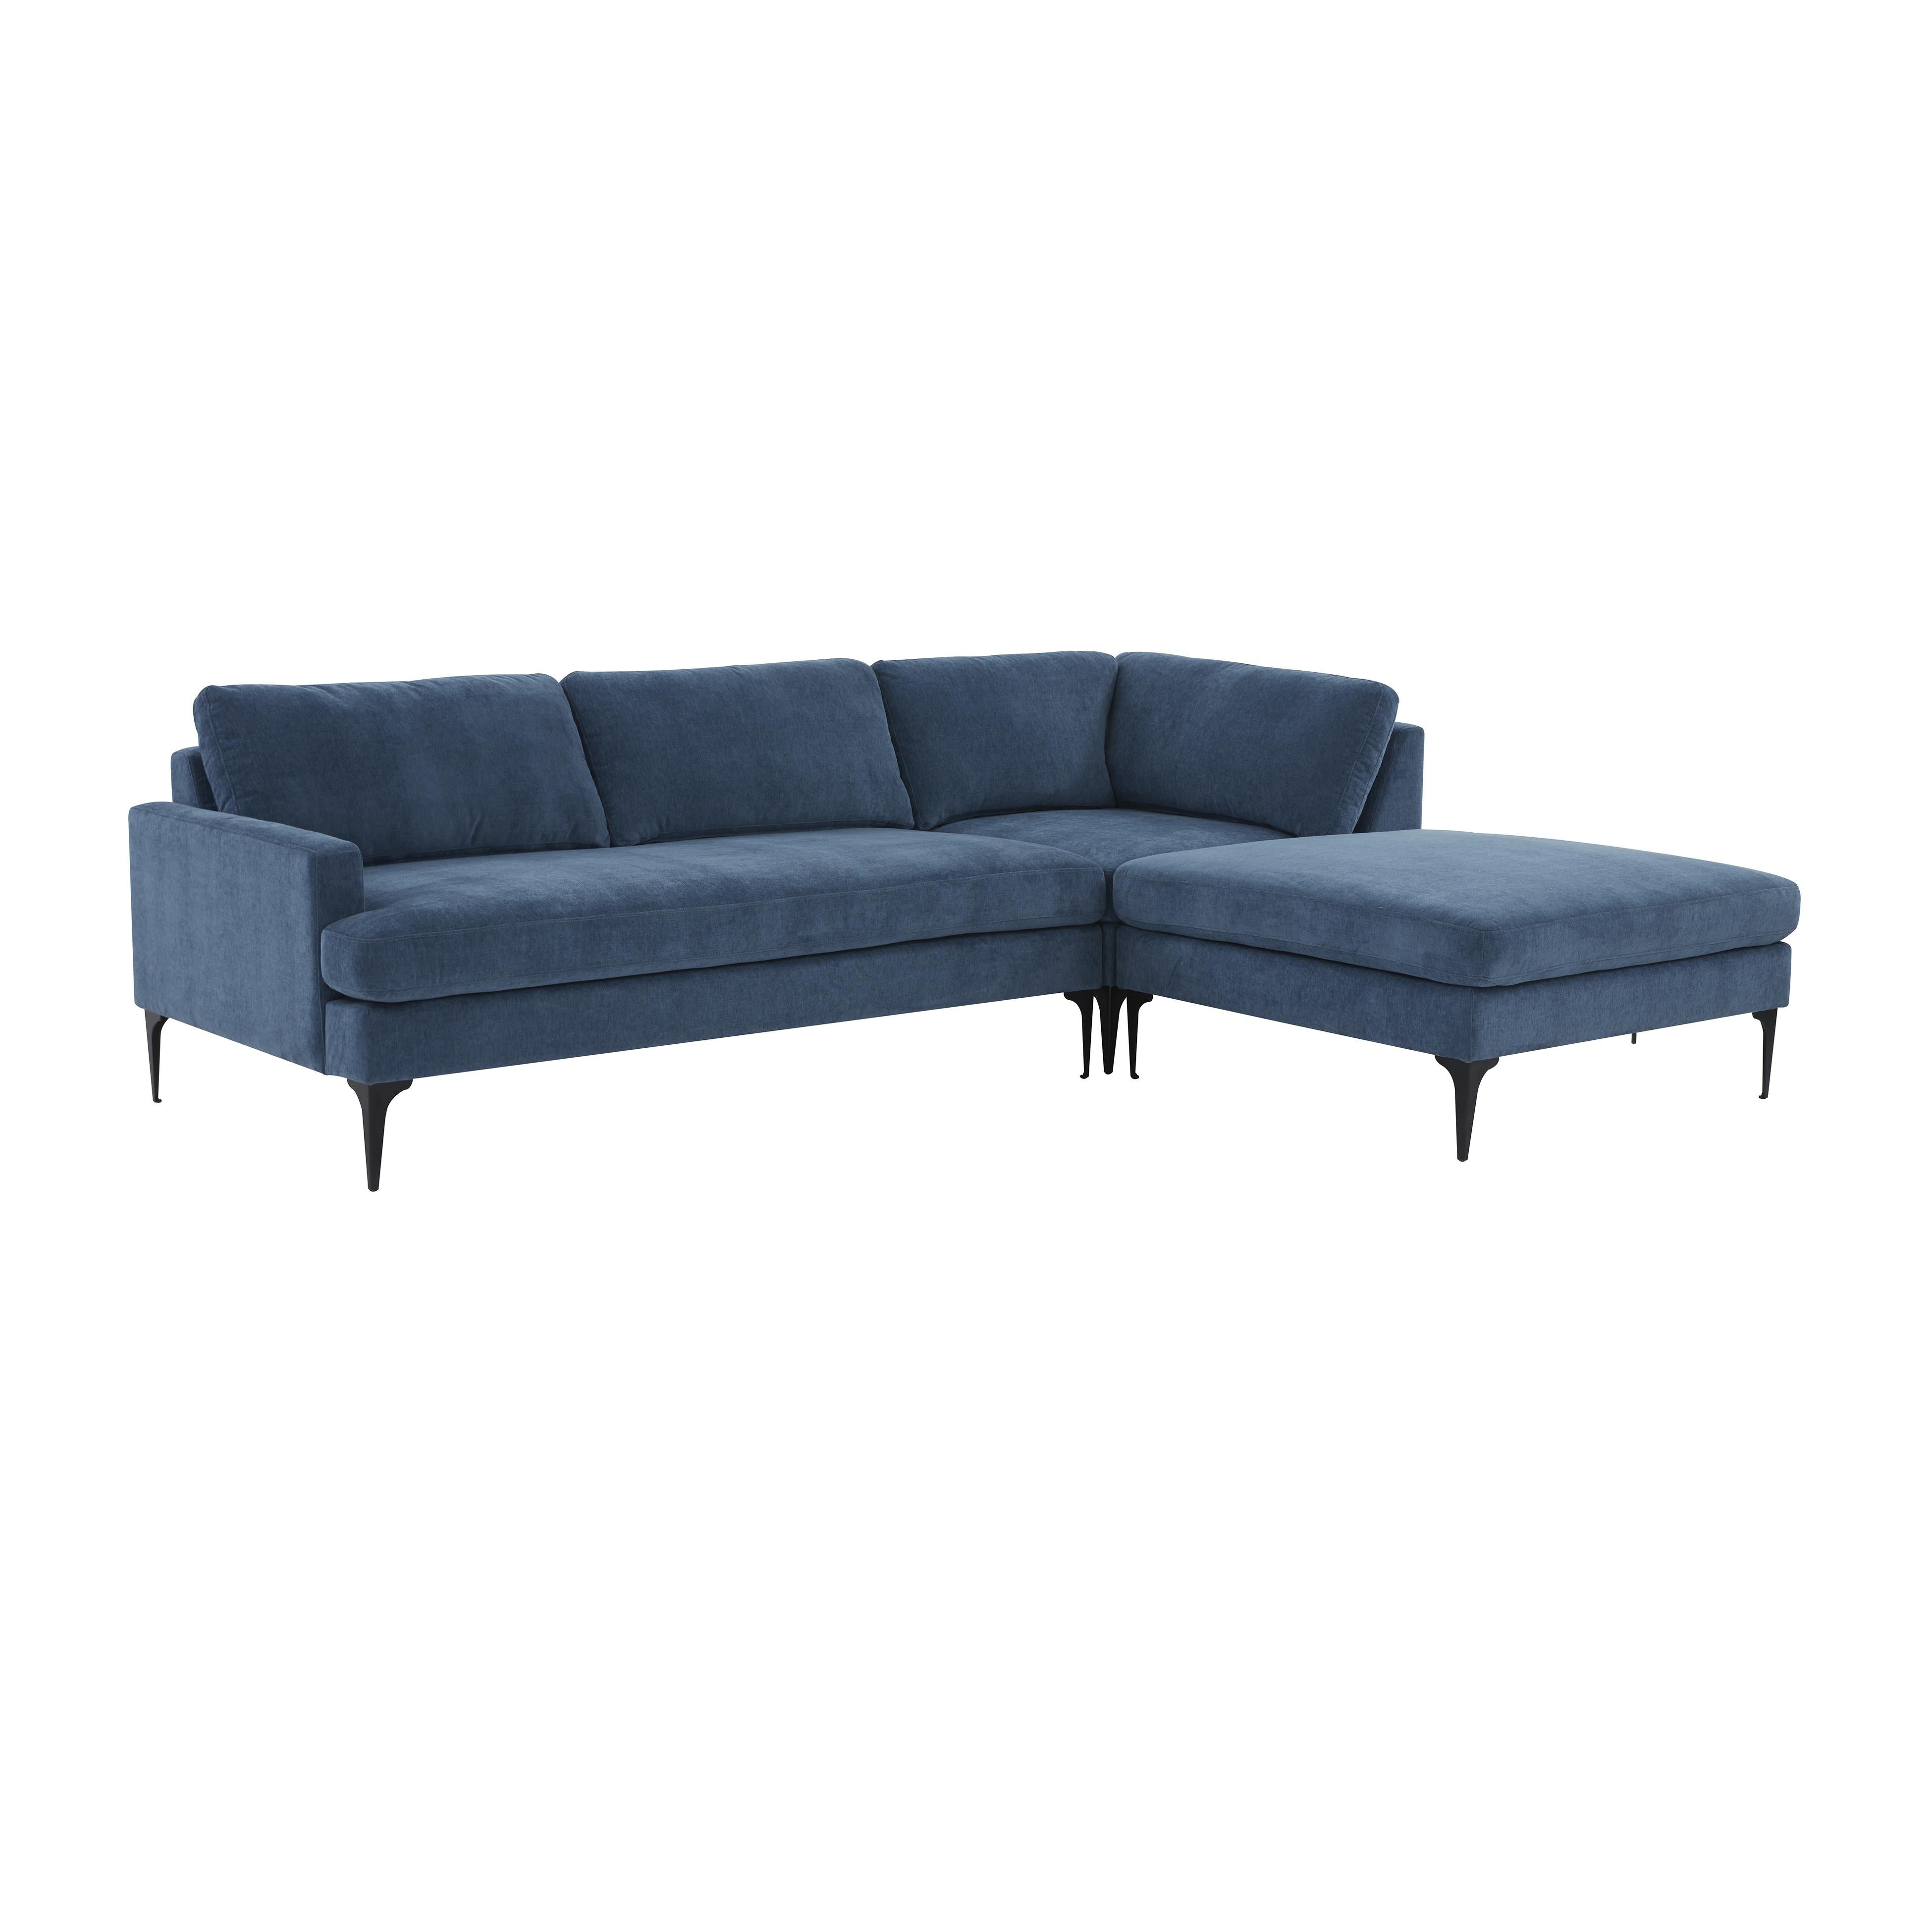 Tov Furniture Sectionals - Serena Blue Velvet RAF Chaise Sectional with Black Legs